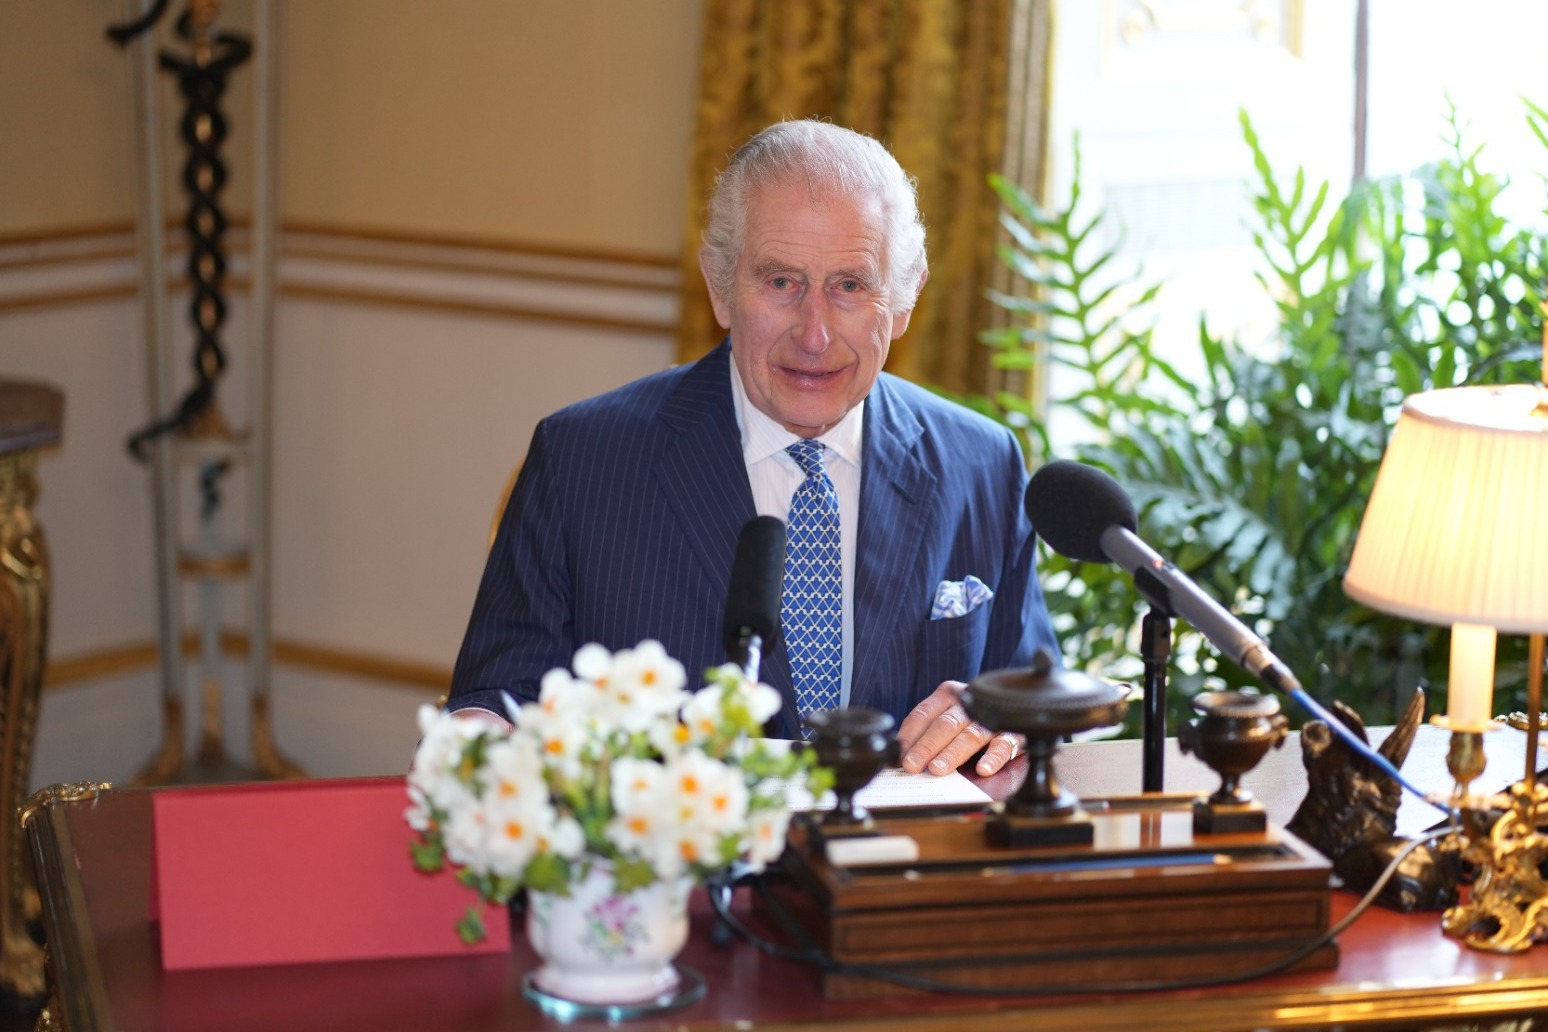 King hails importance of care and friendship in times of need